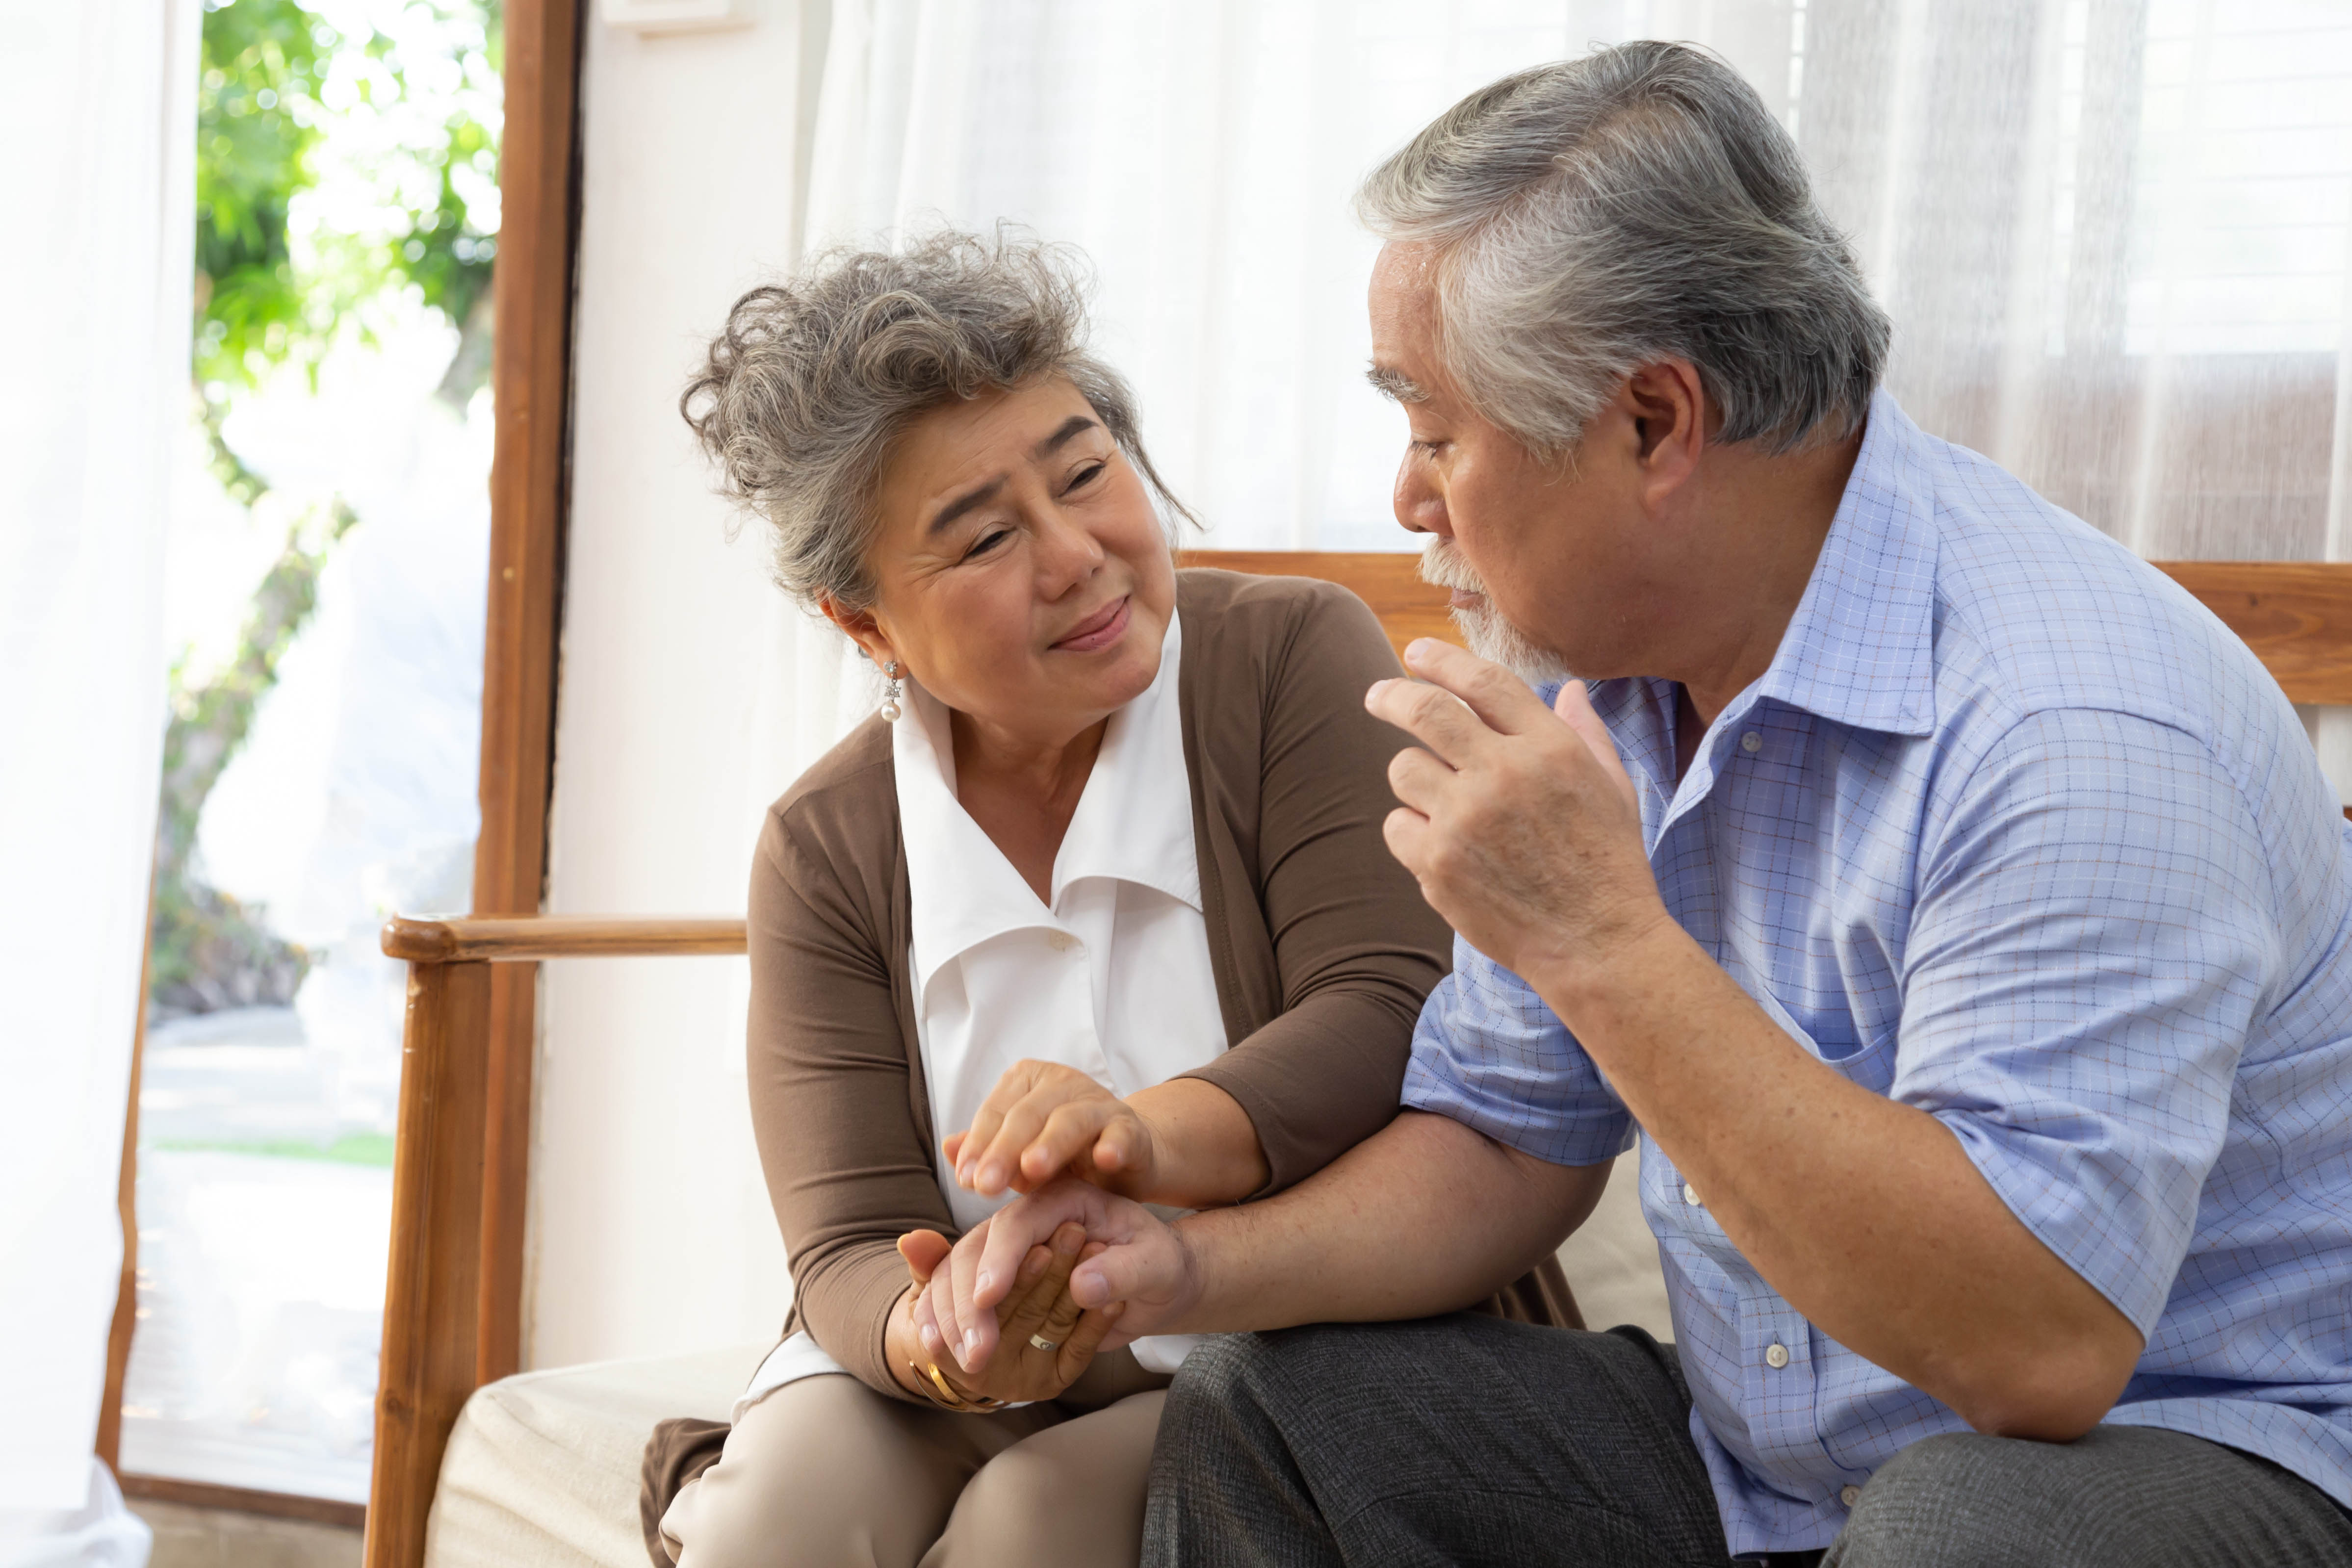 Elderly man and woman holding hands and sitting on a couch .